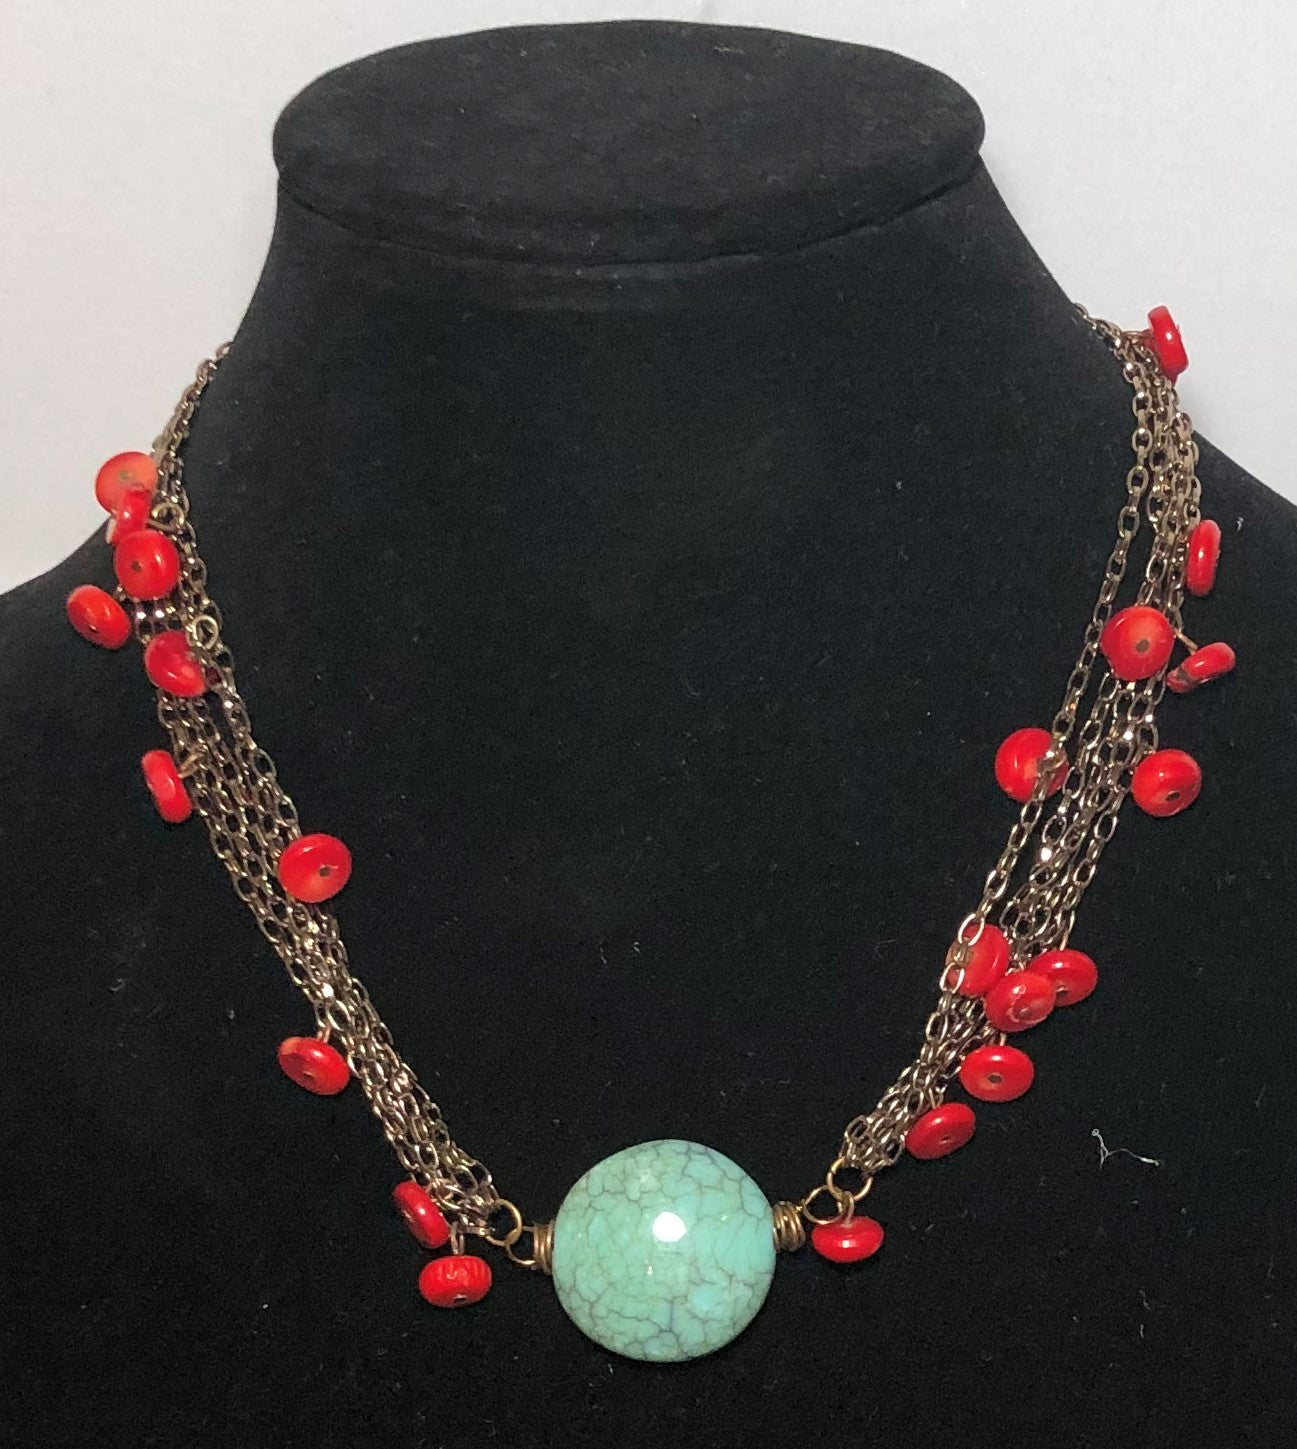 Turquoise and Red Necklace